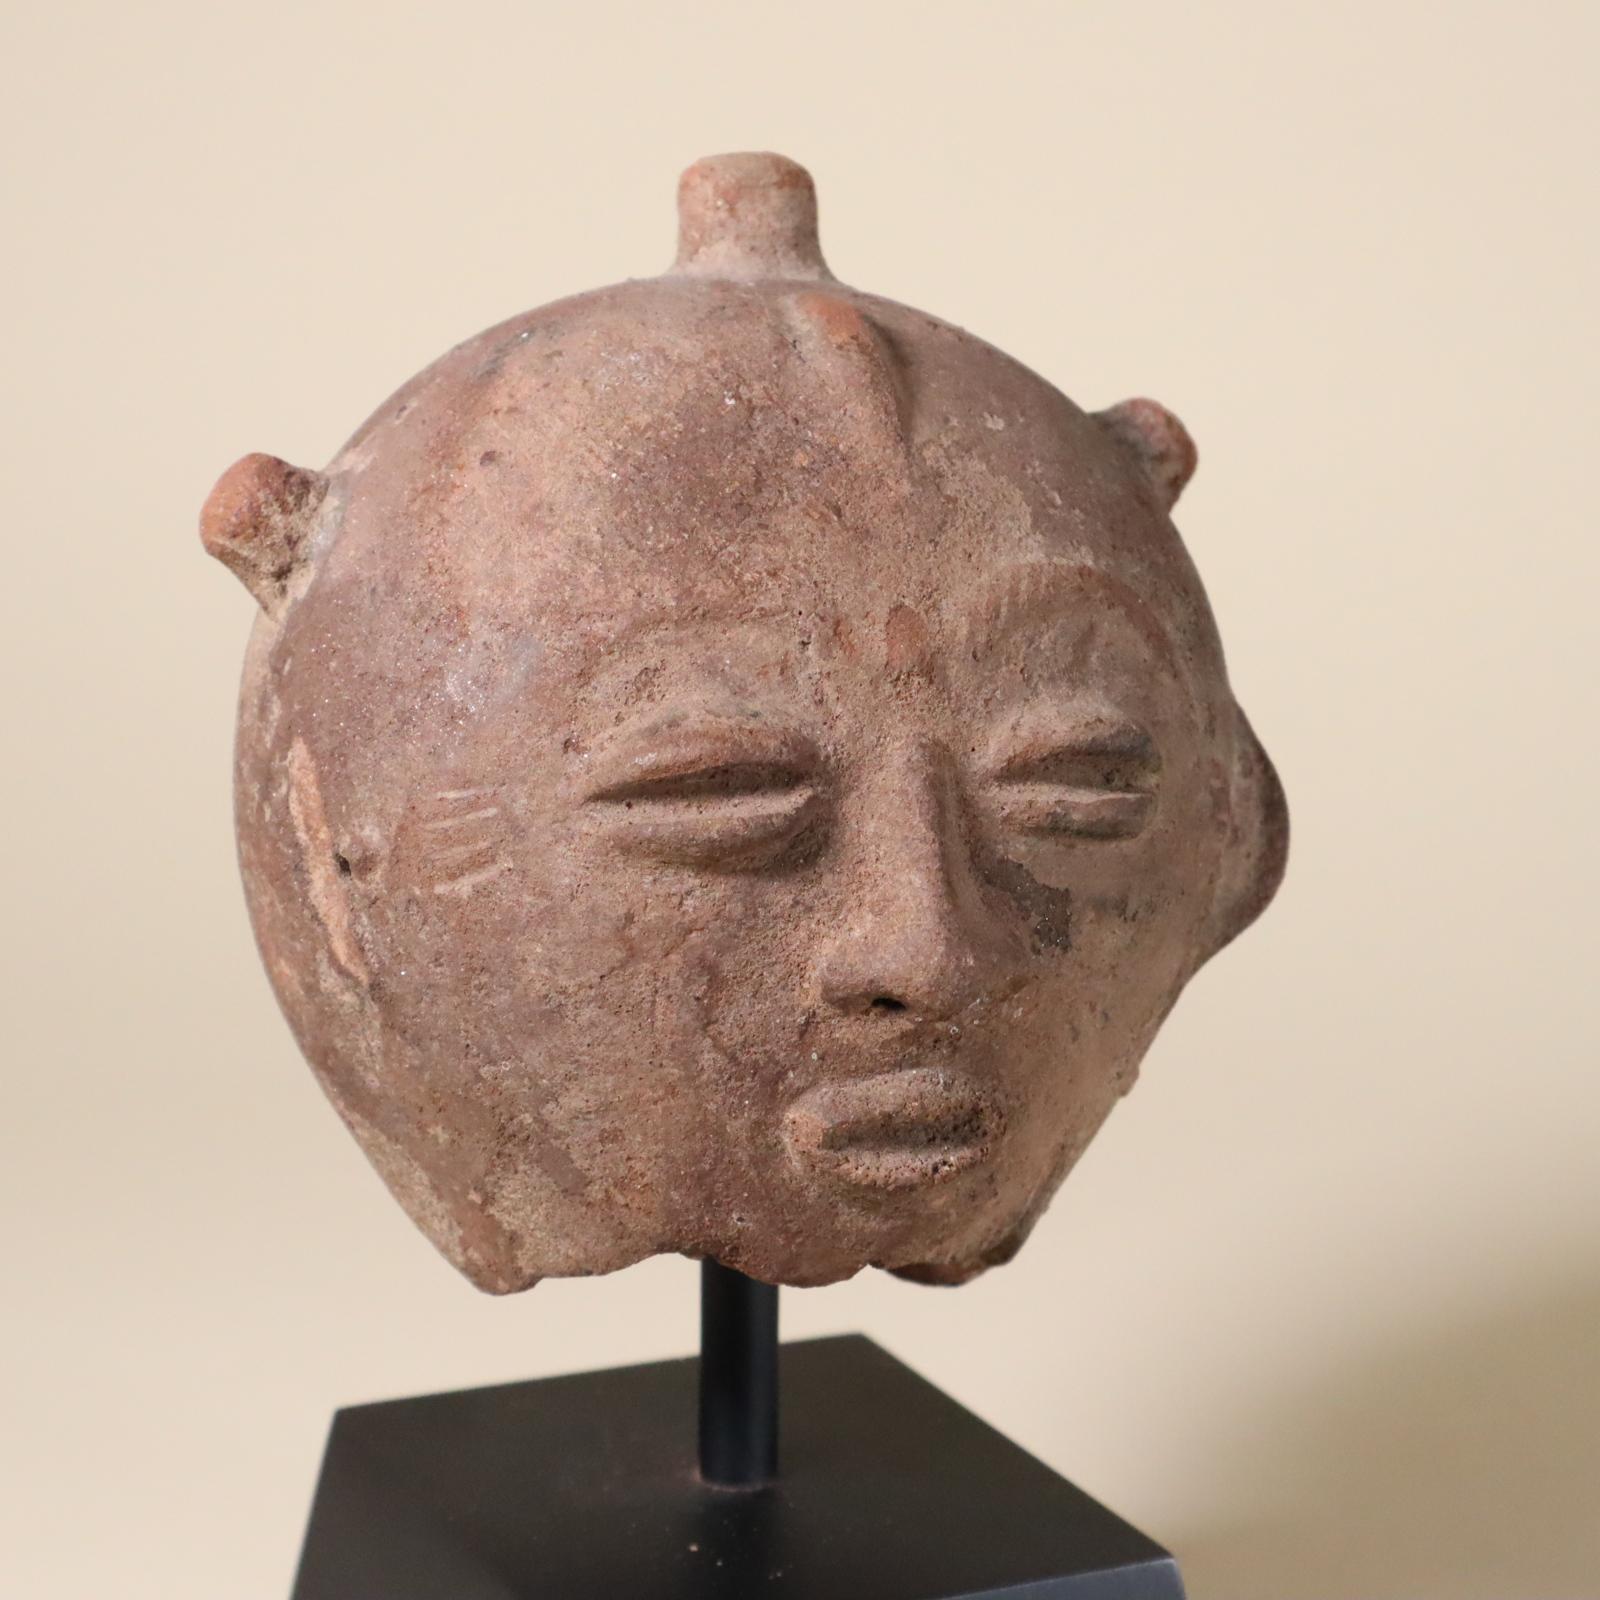 Store closing March 31. Here is another type of earthenware or terracotta portrait from the Akan people of Ghana. 19th century or earlier. 
This one globular, with three raised coils of hair and a raised crescent shape on back of head. Finely